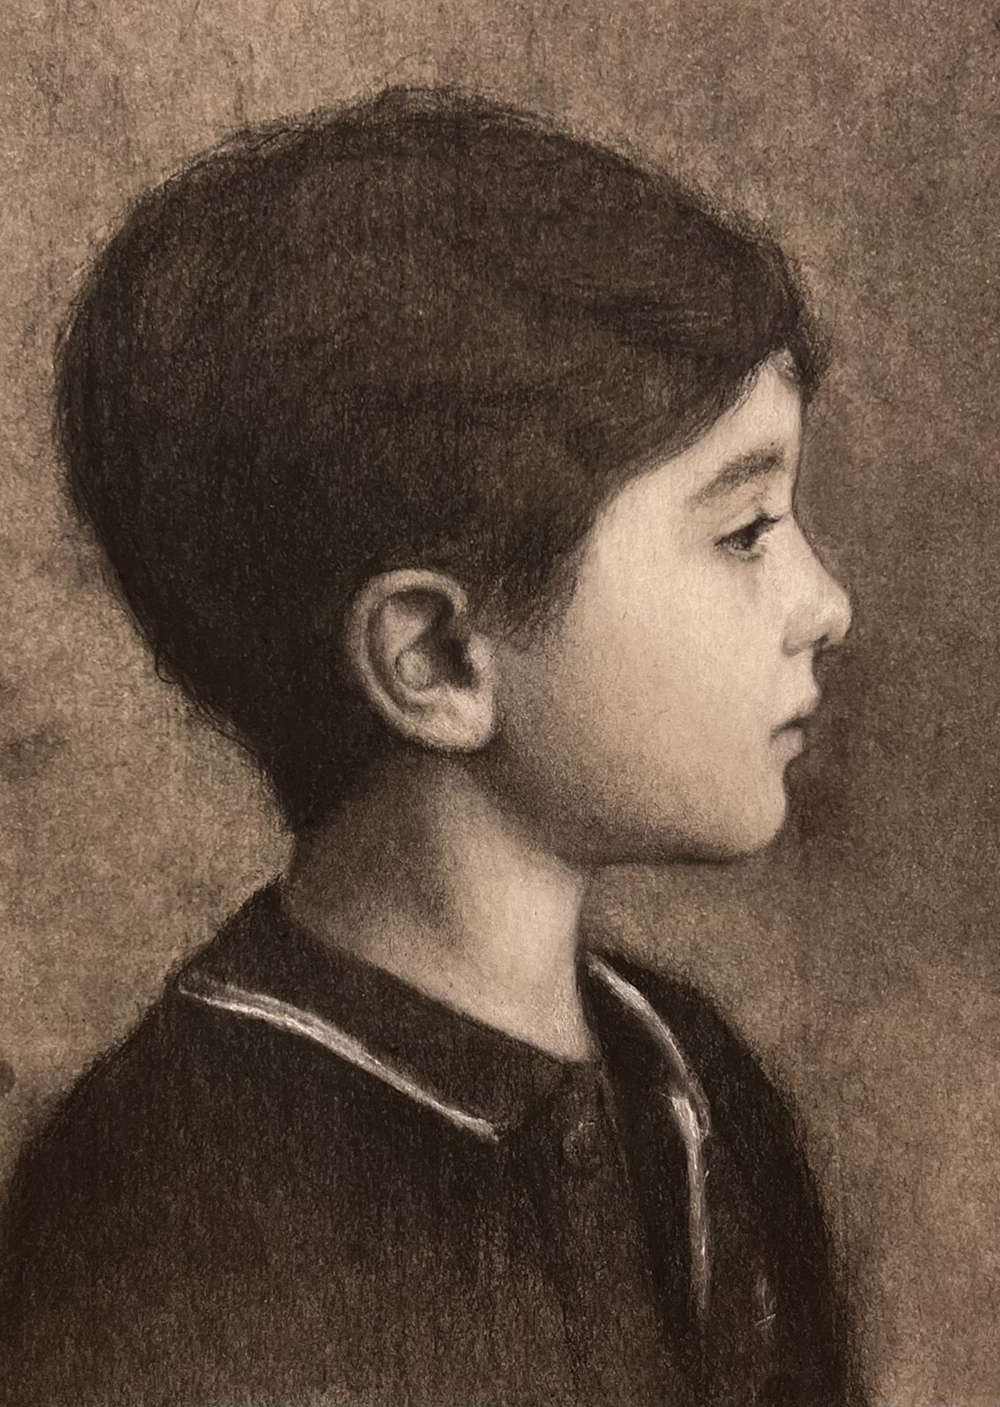 Drawing of a child